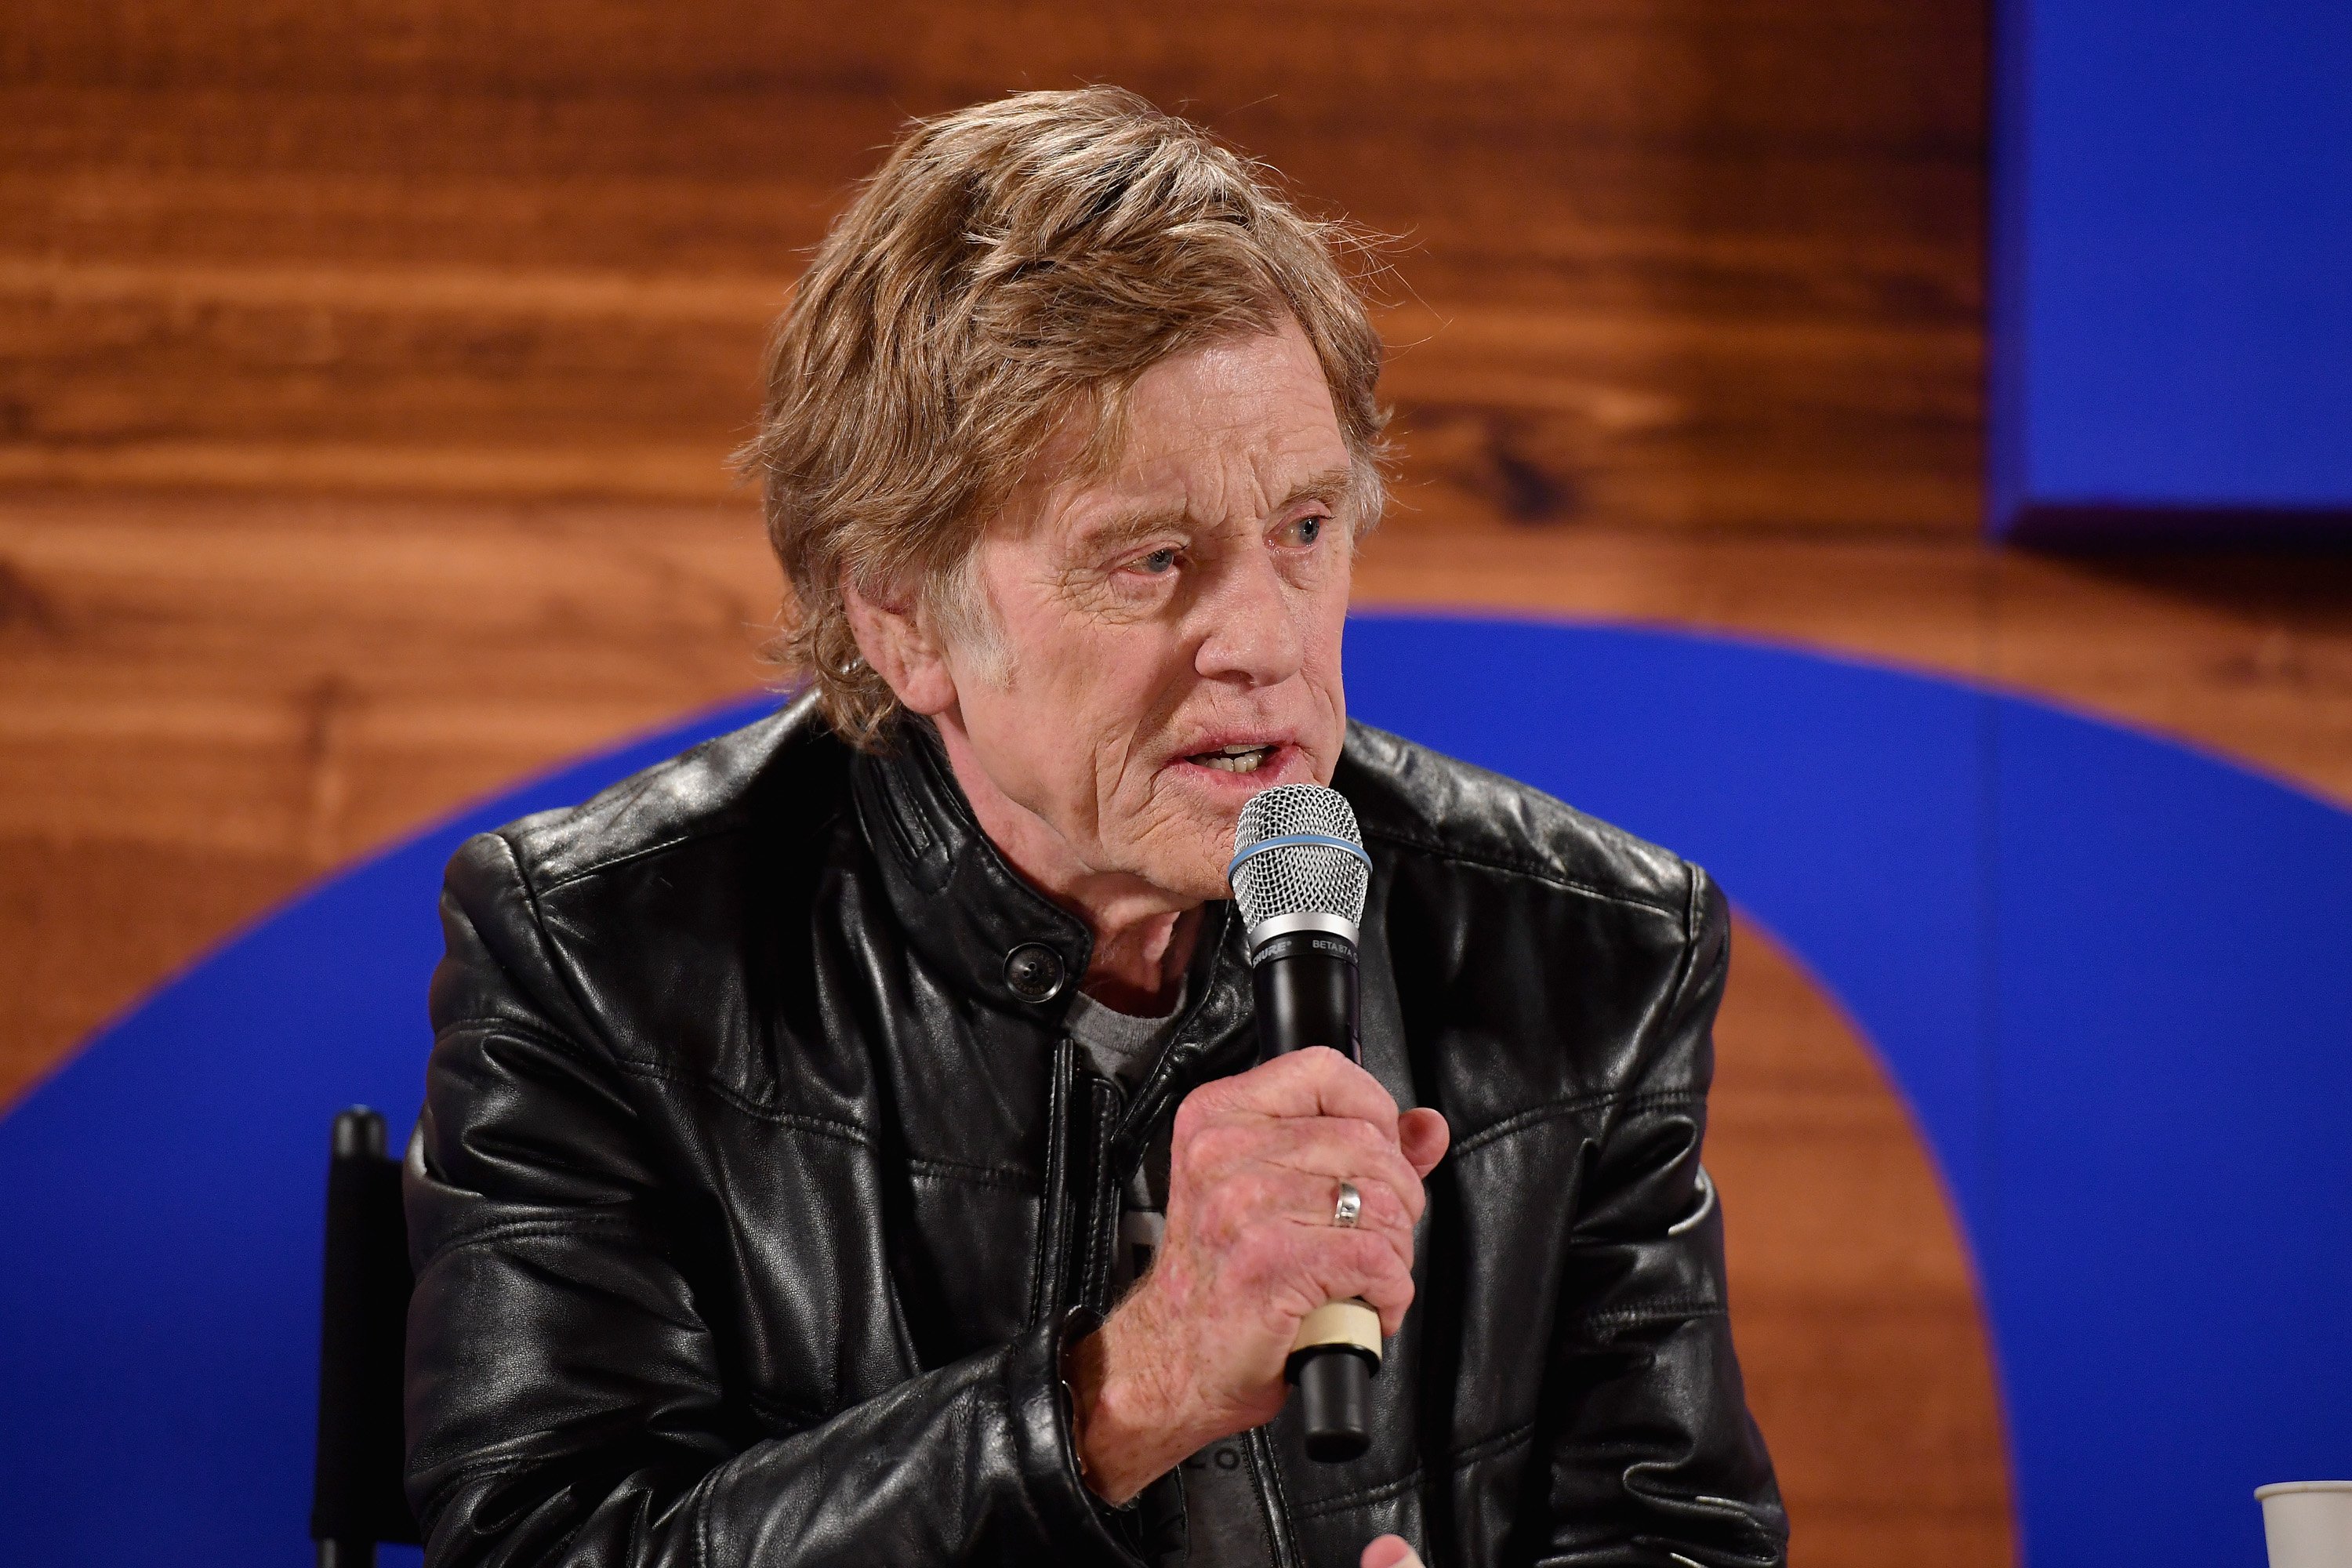 Robert Redford speaks onstage during the 2018 Sundance Film Festival | Photo: Getty Images